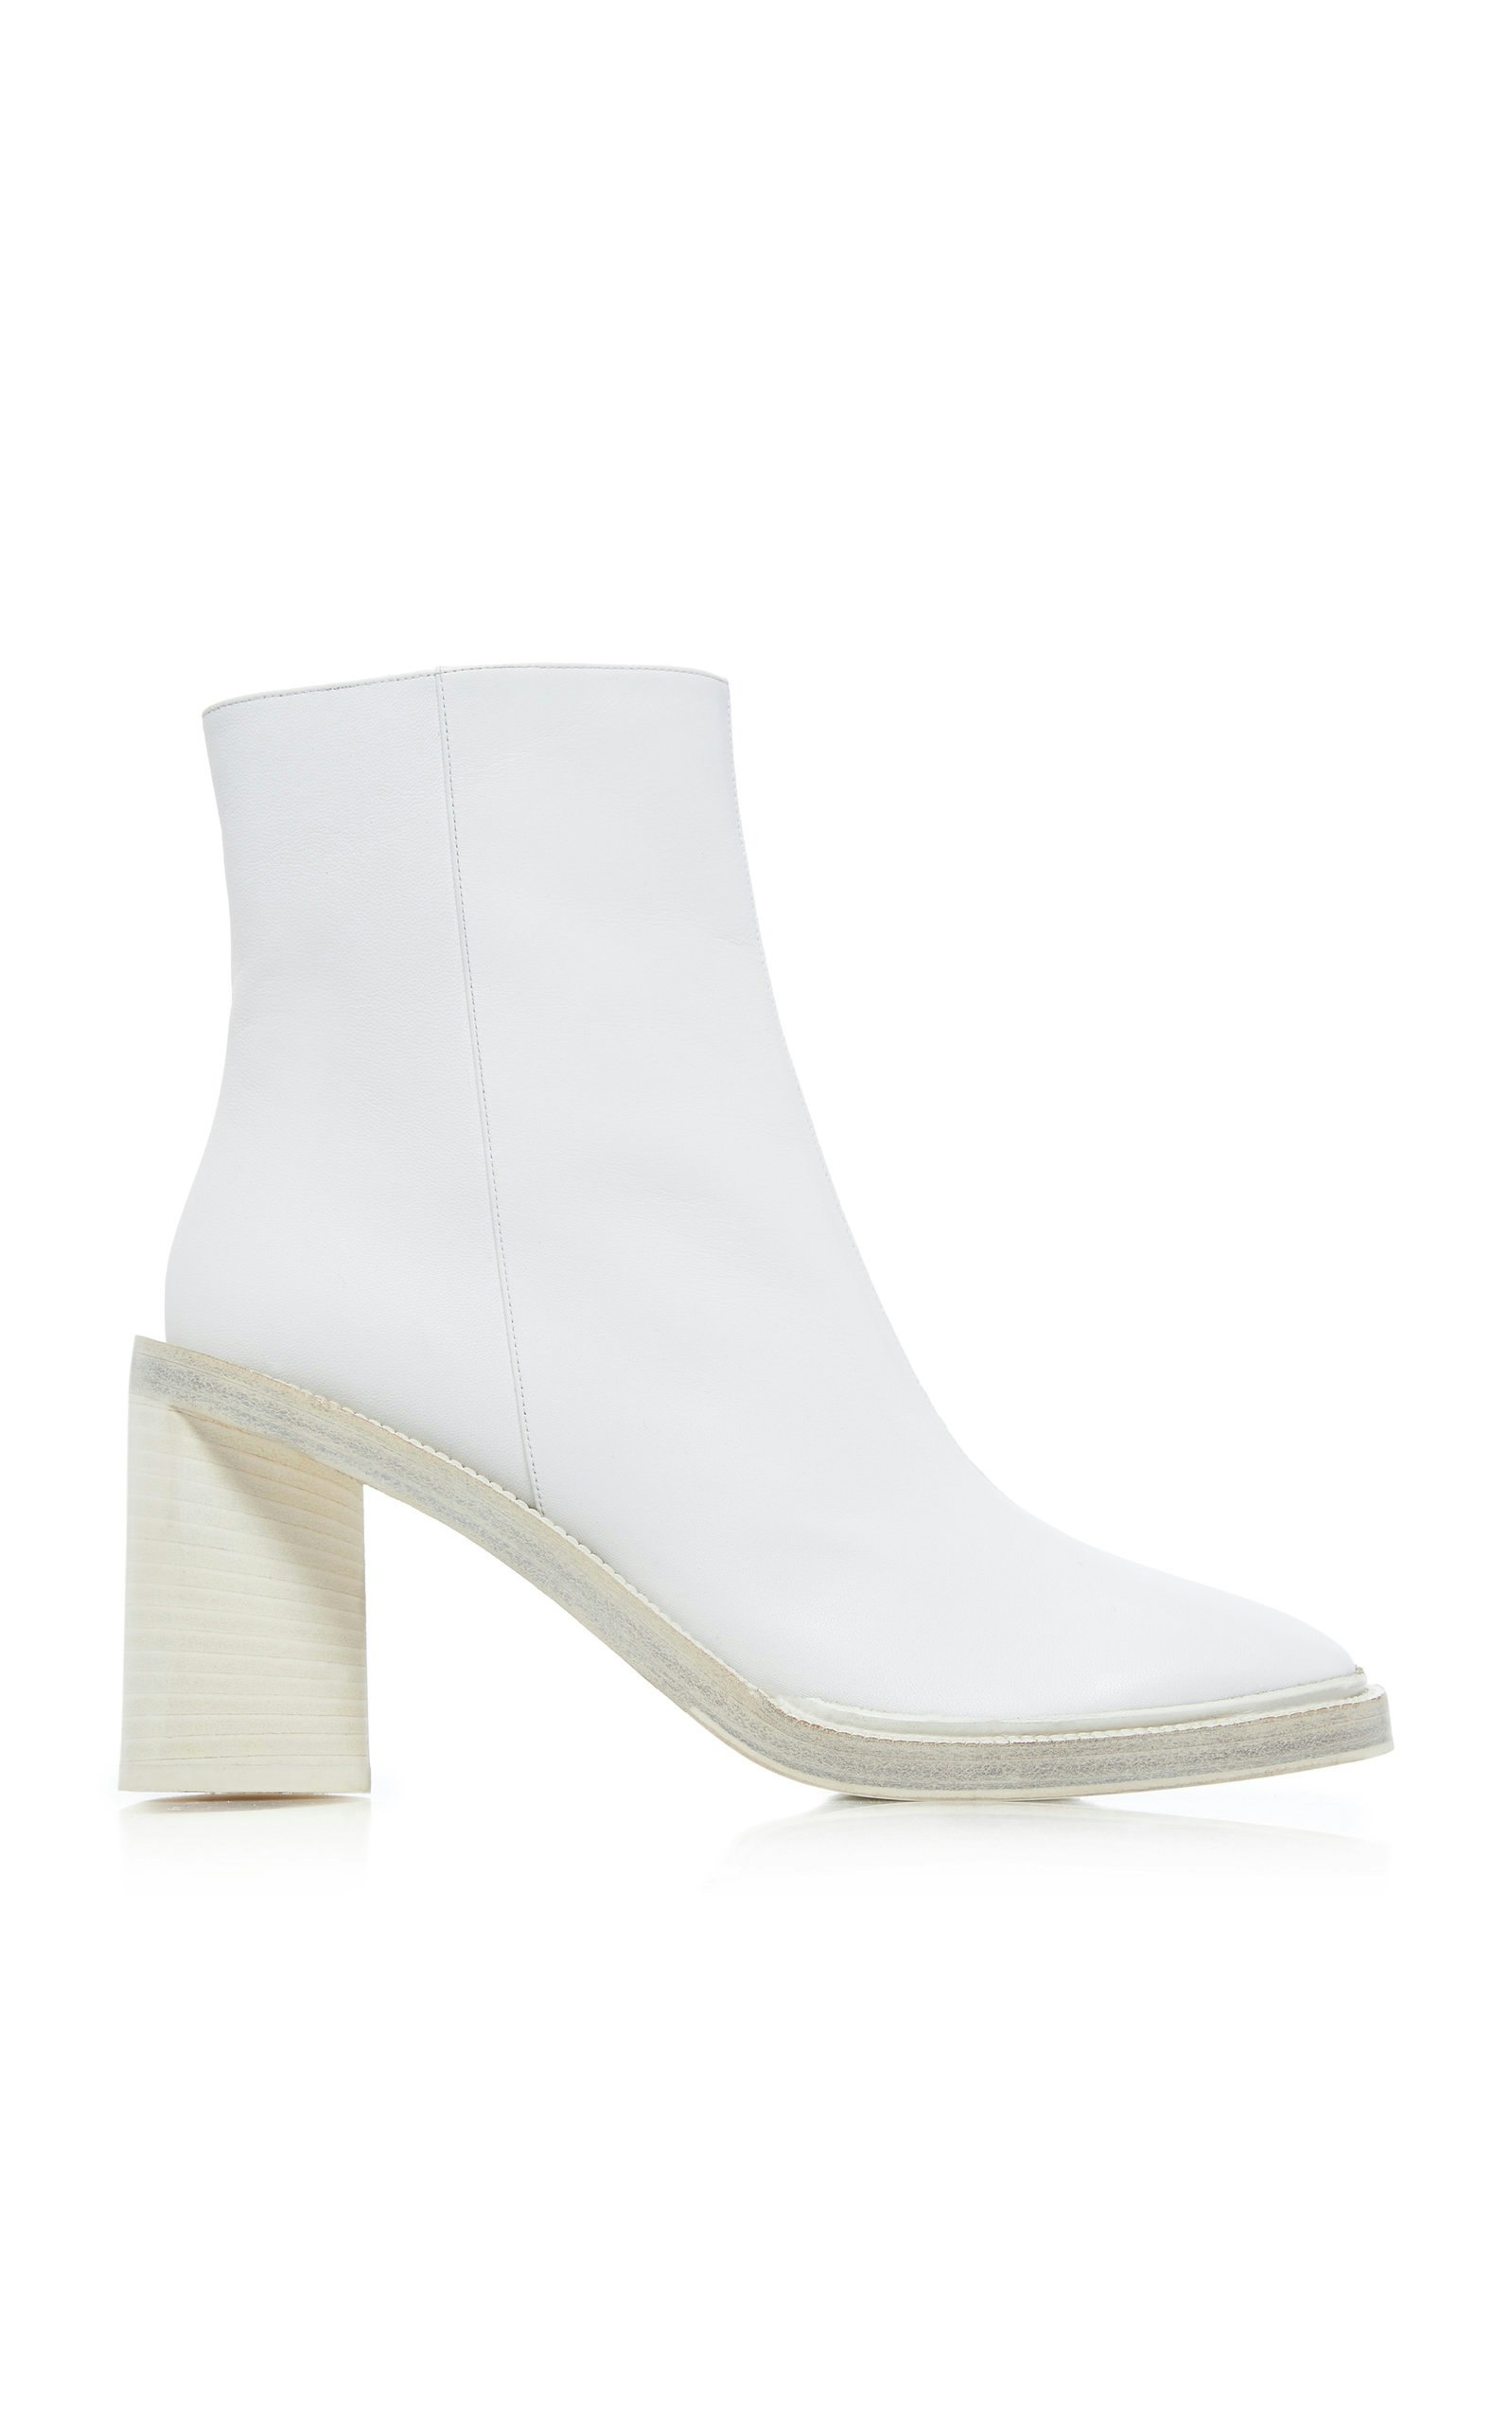 white short leather boots